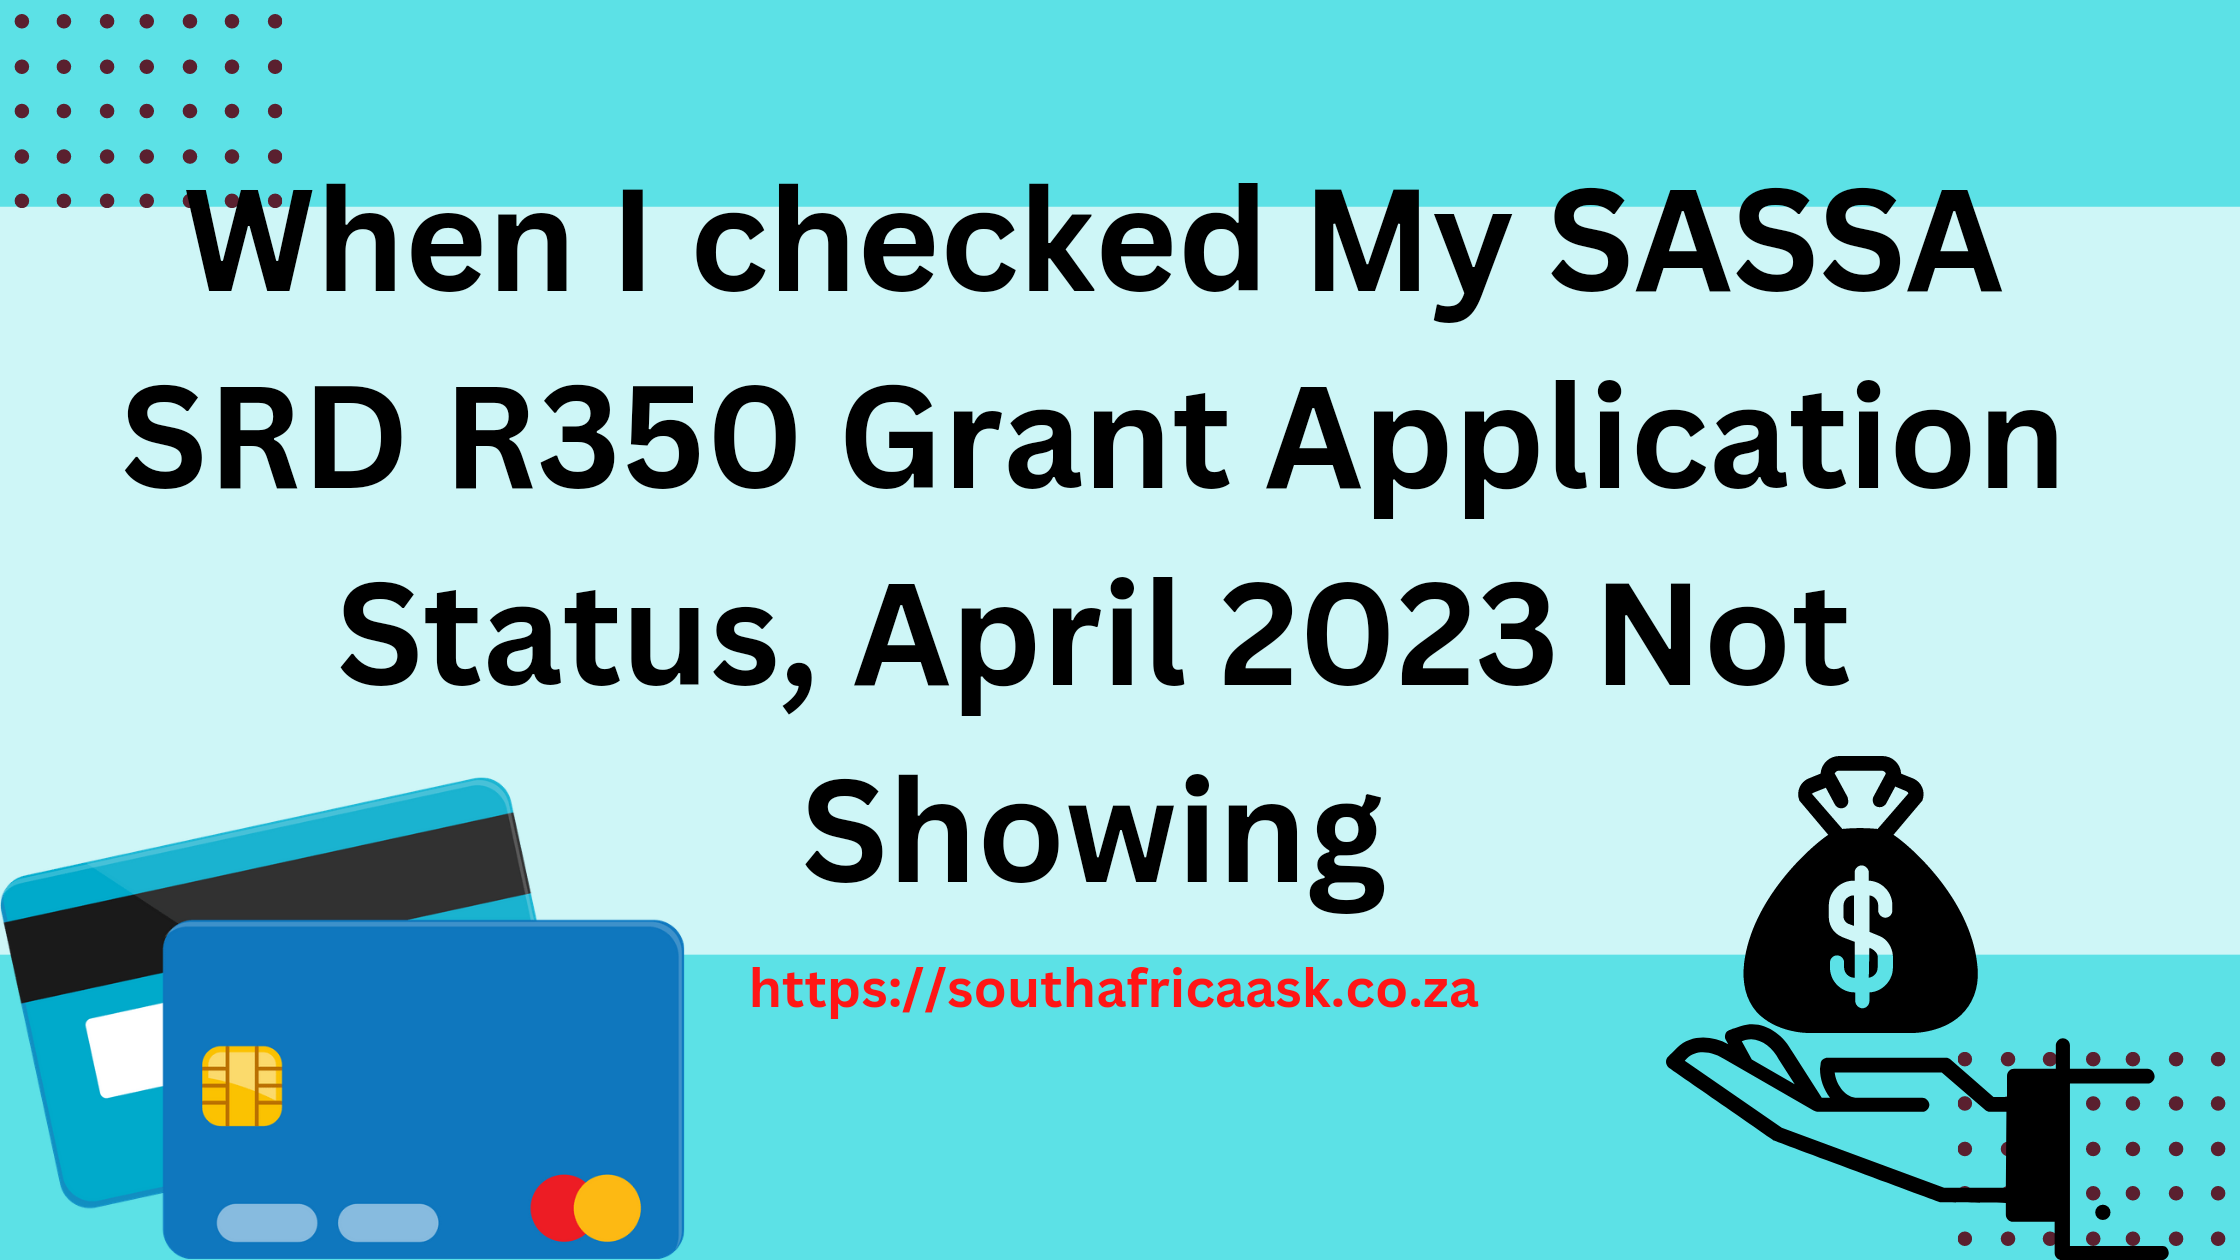 When I checked My SASSA SRD R350 Grant Application Status, April 2023 Not Showing